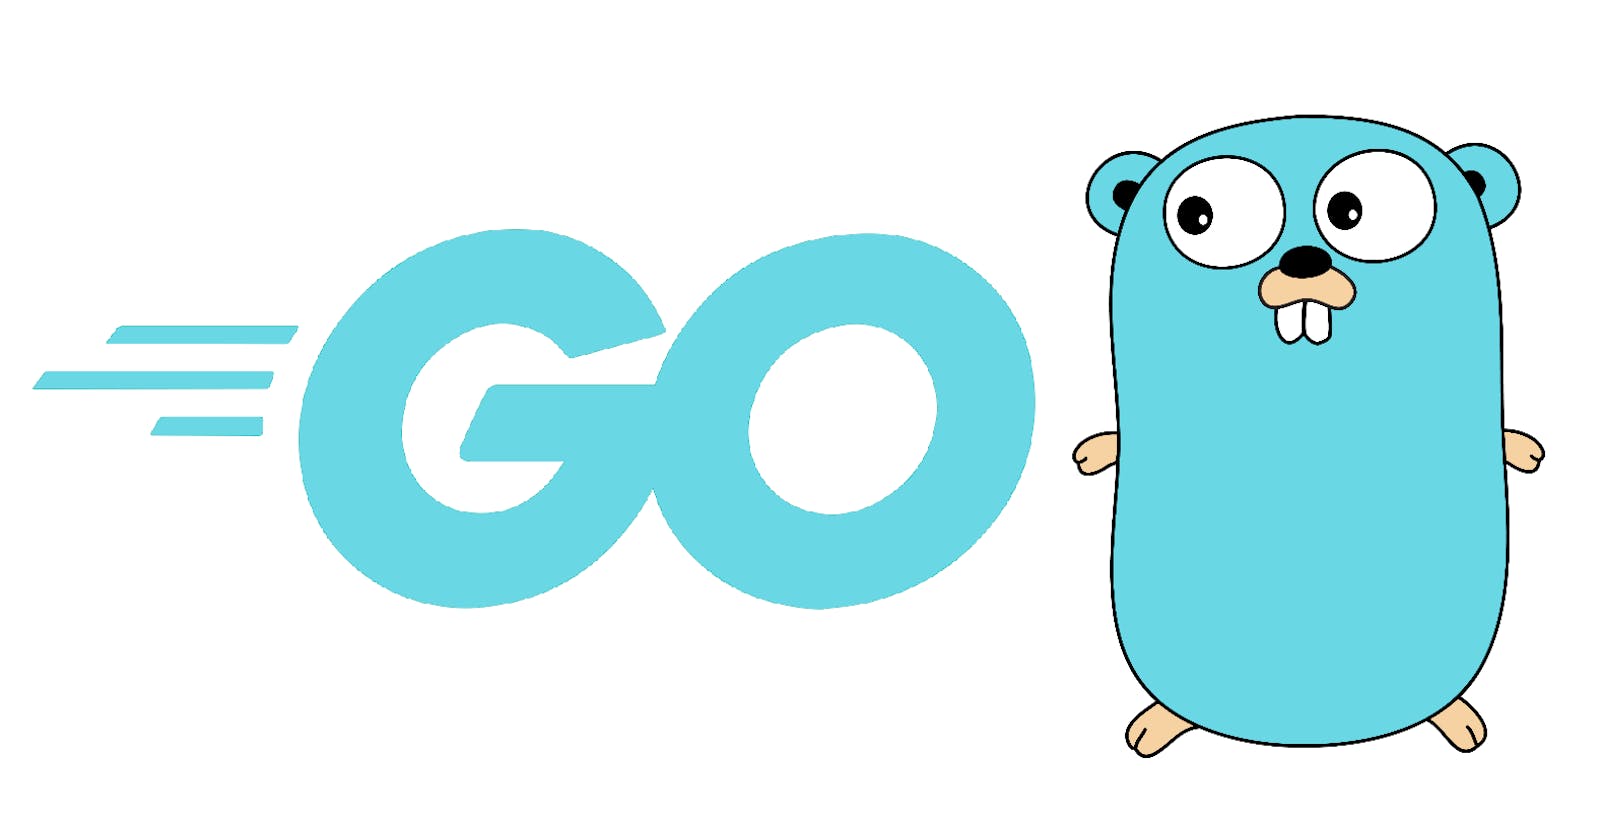 How to Develop a Domain Verifier CLI  using Golang.